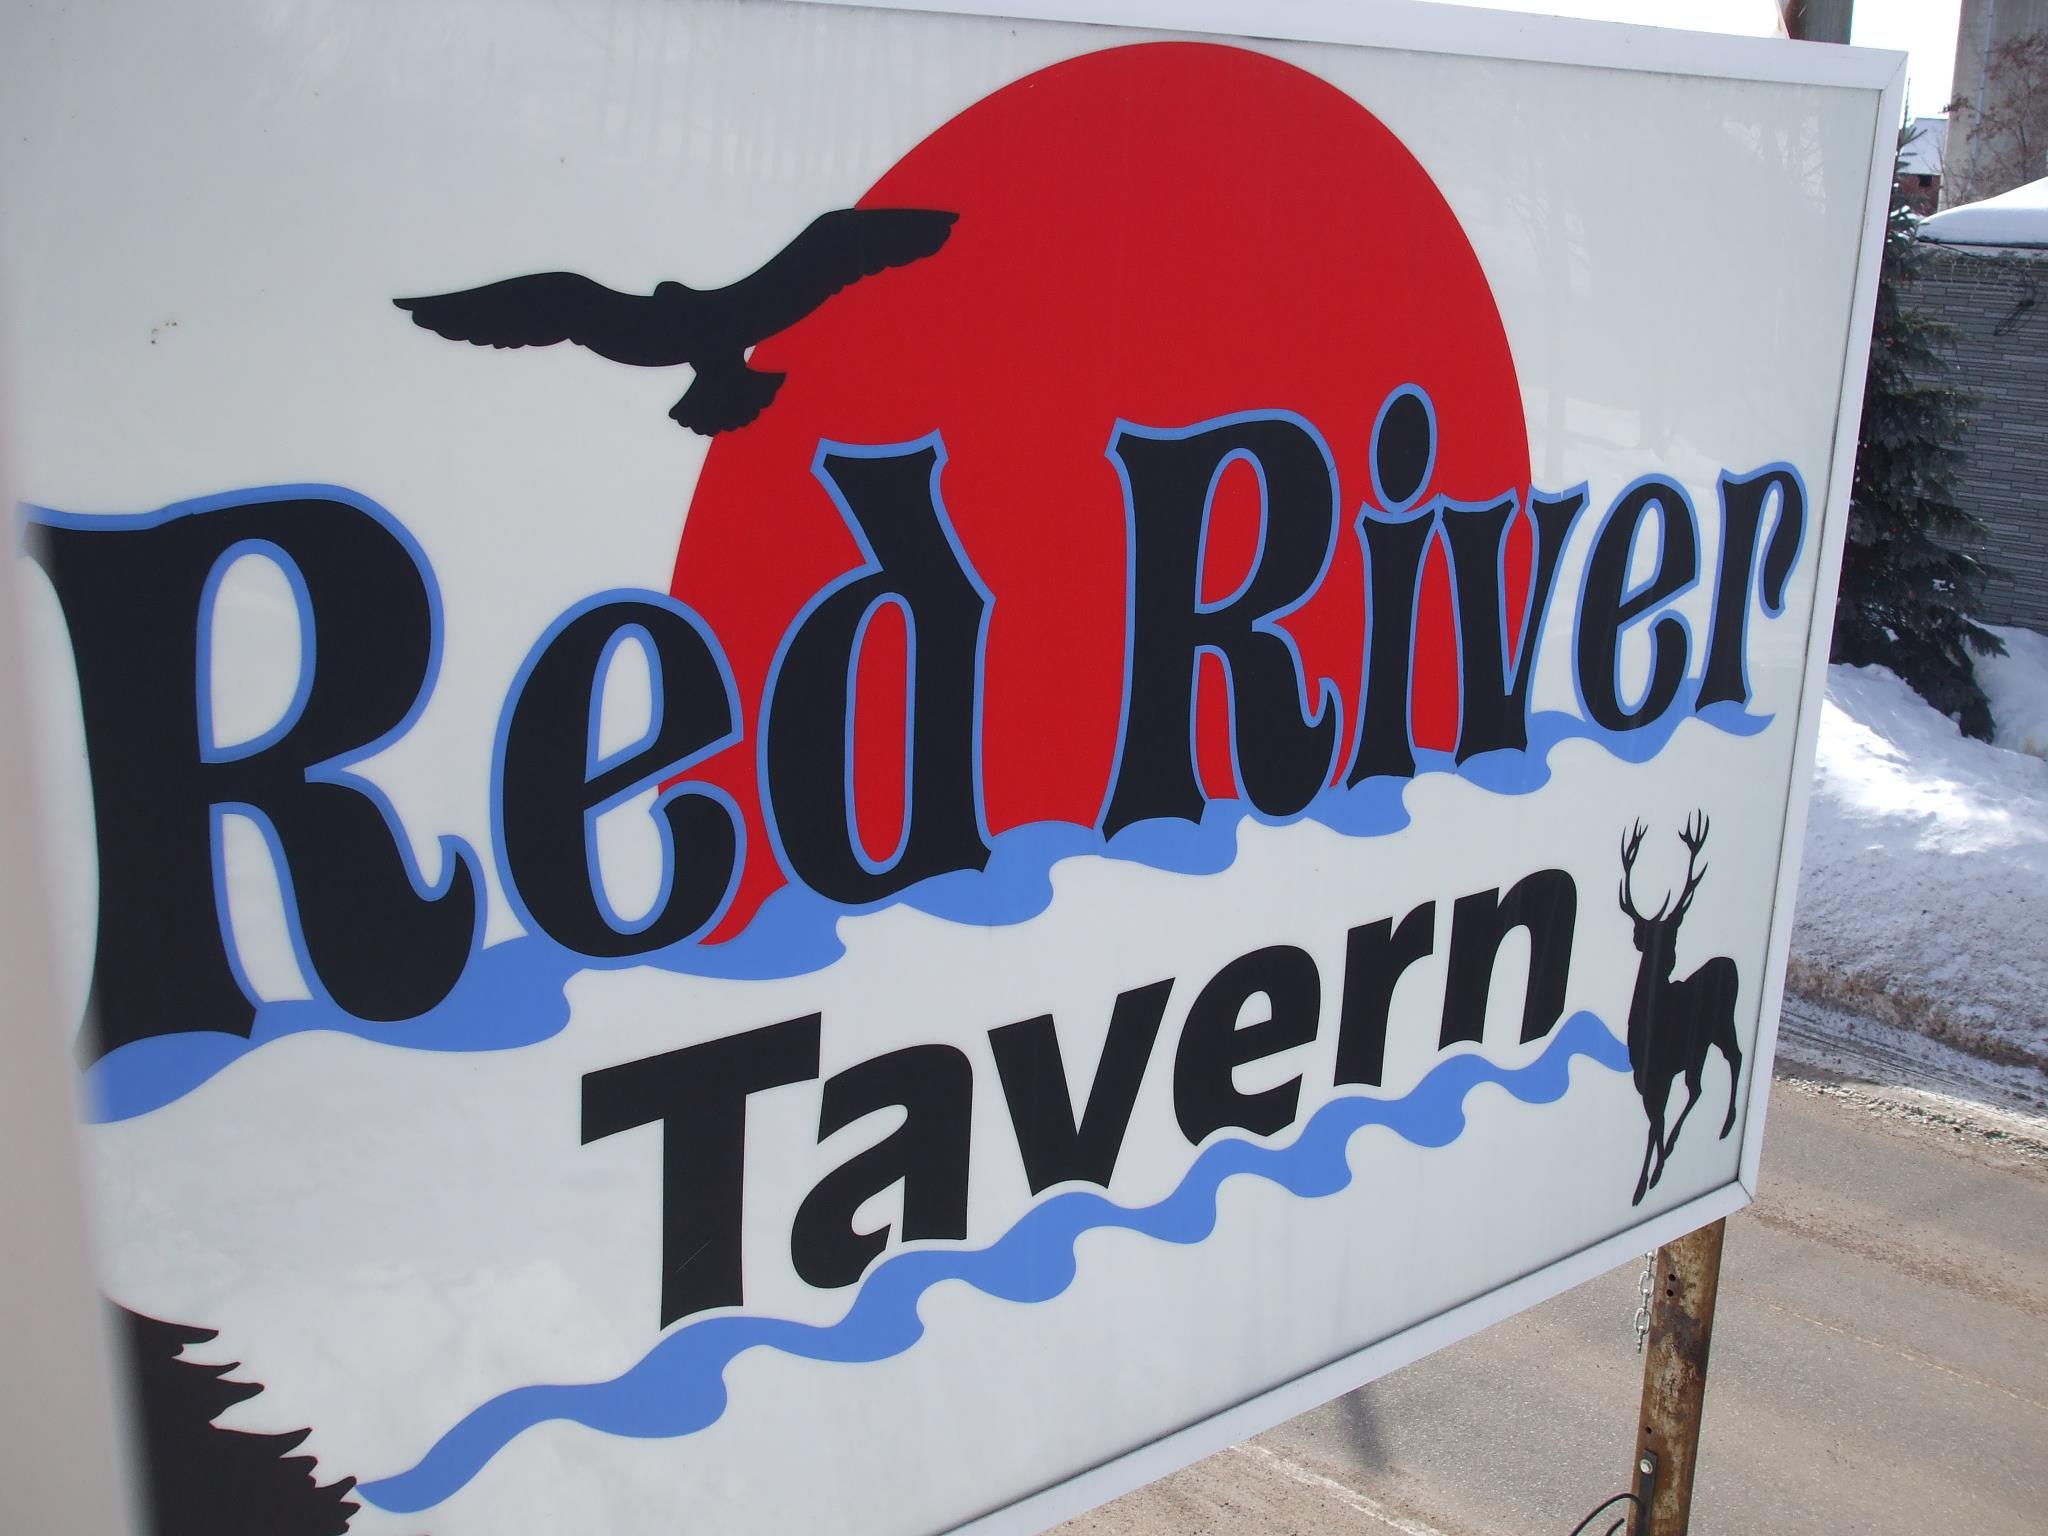 Red River Tavern